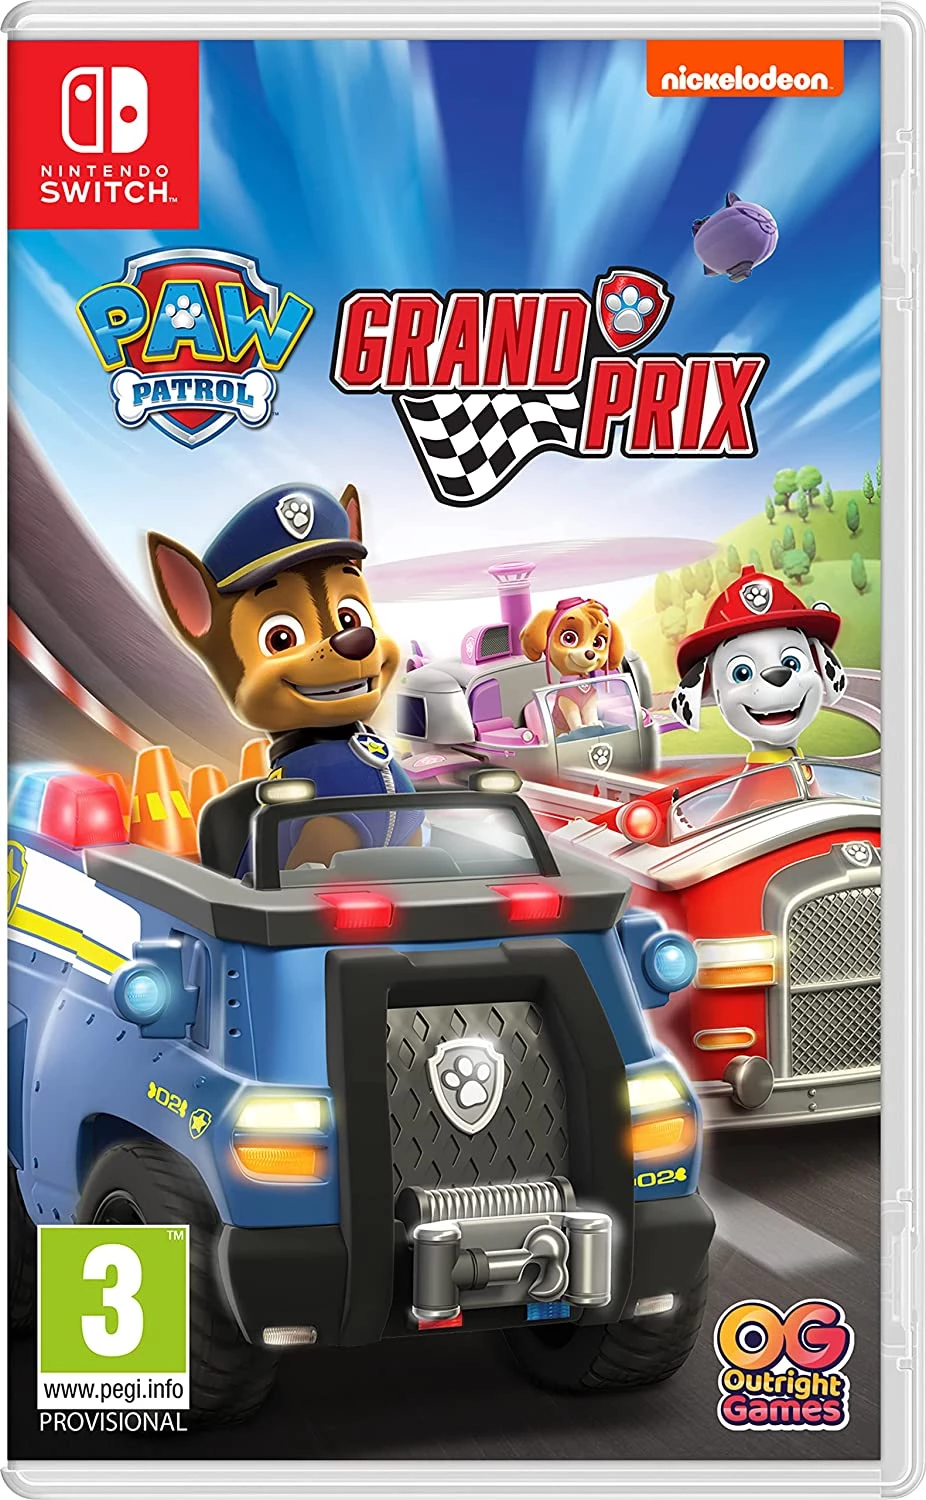 Paw Patrol: Grand Prix (Switch), Outright Games